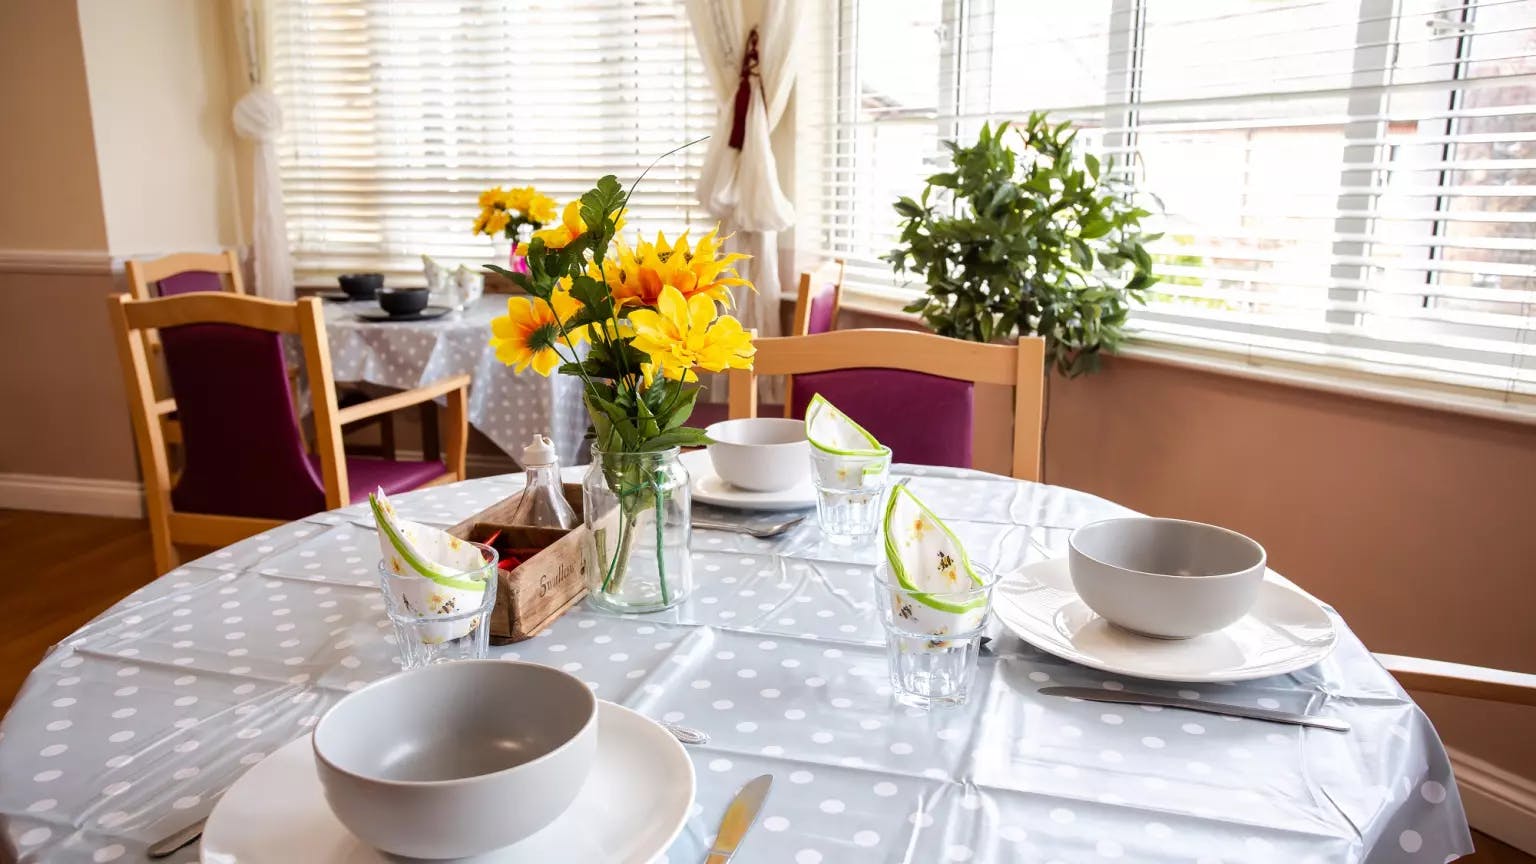 Dining room of Fosse House care home in St Albans, Hertfordshire